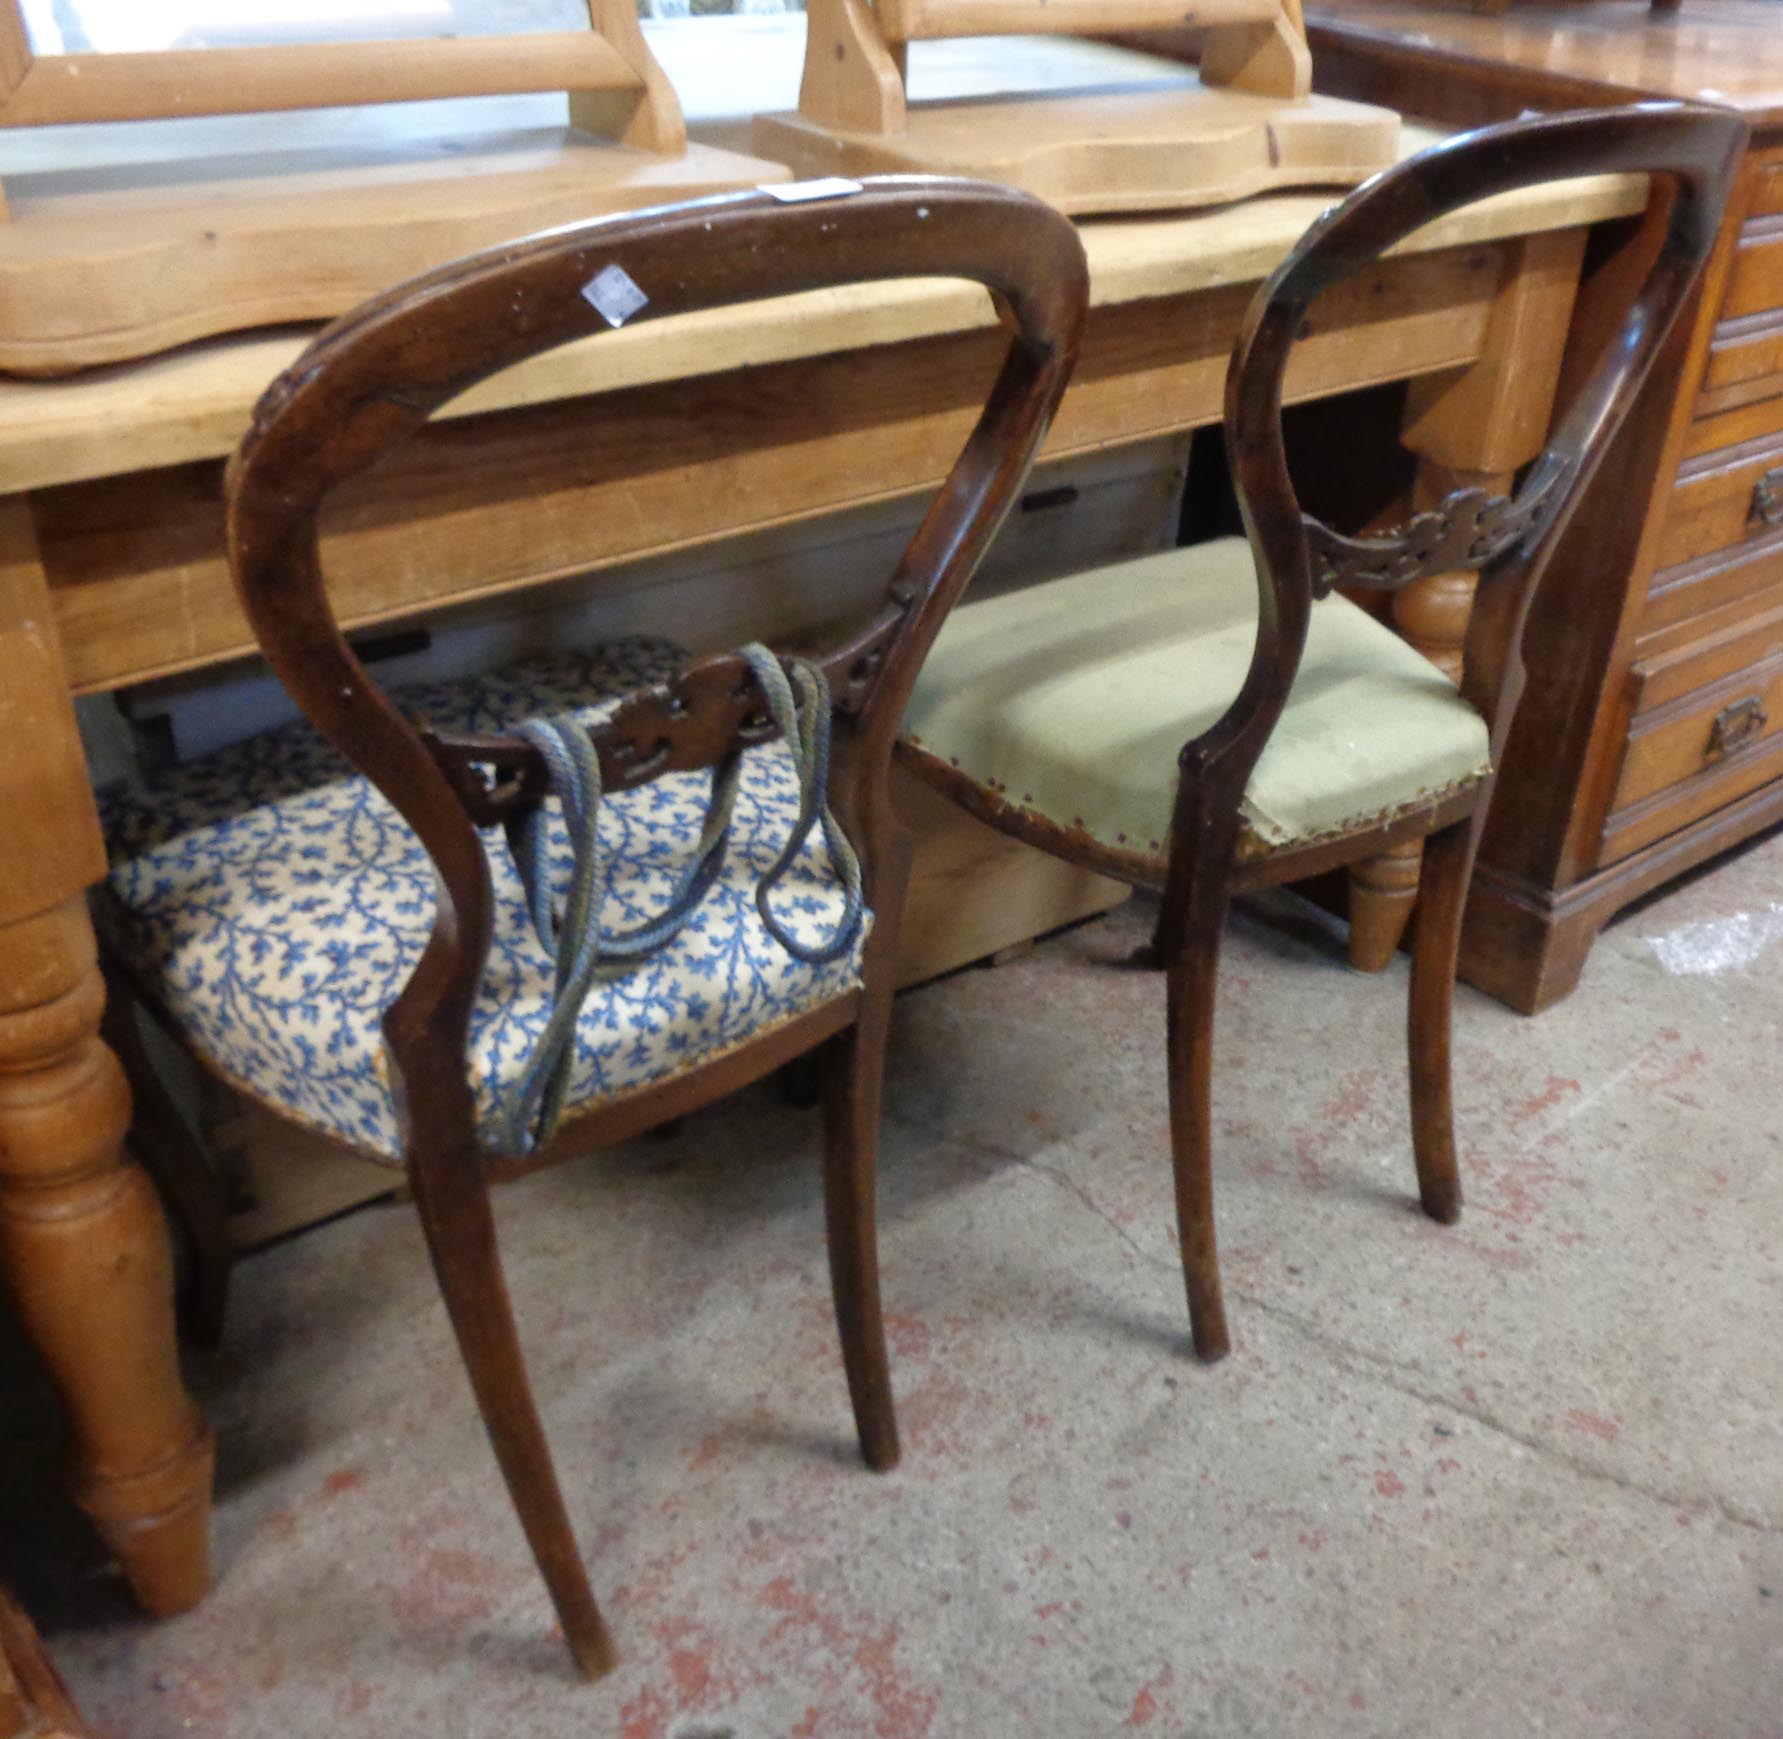 Three matching Victorian mahogany framed balloon back dining chairs - sold with a pair similar - - Image 2 of 2